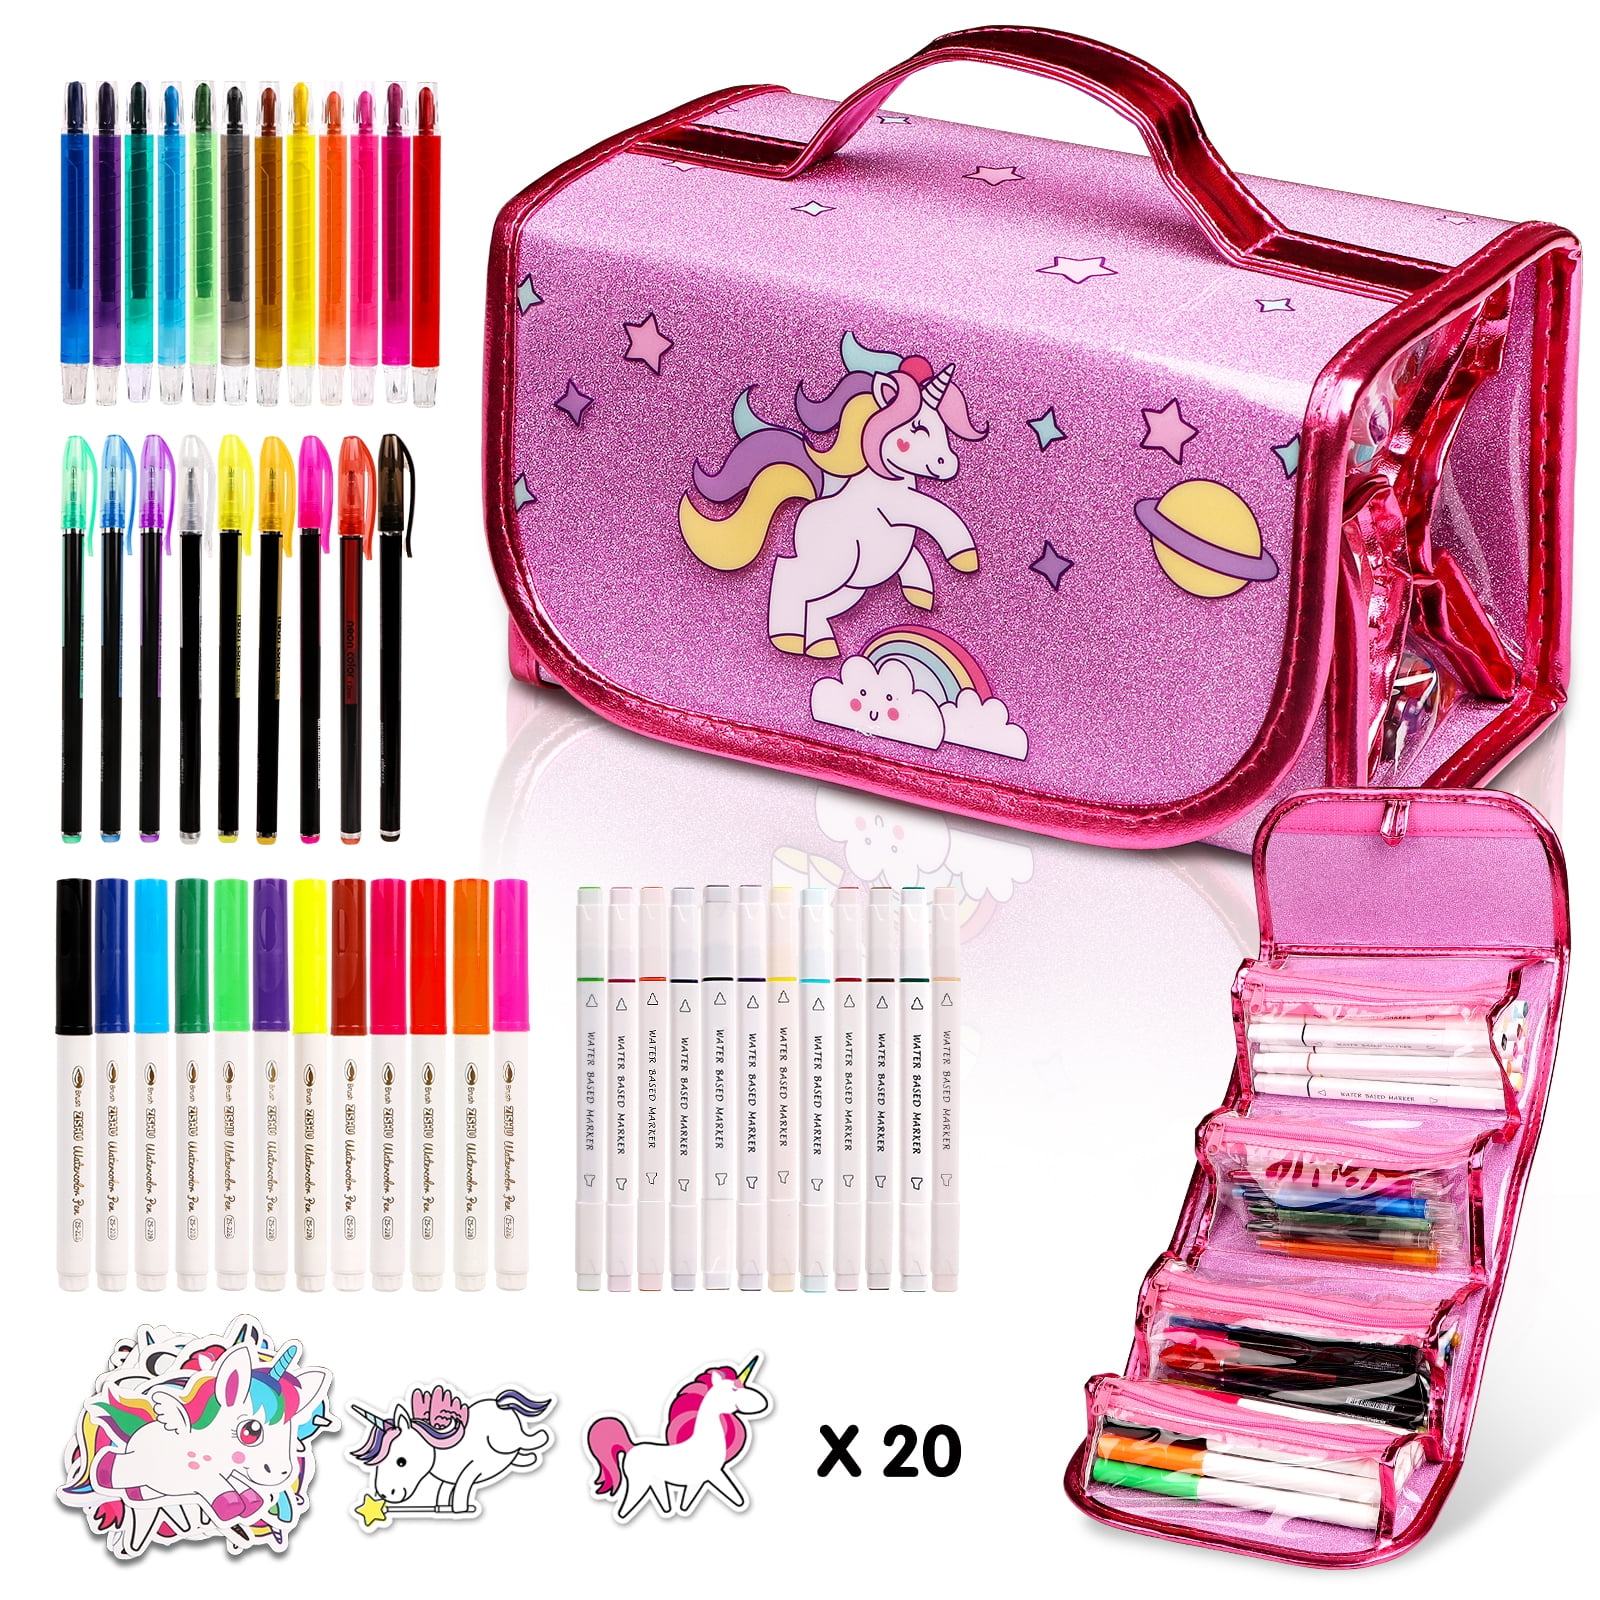  Hiappt Fruit Scented Markers Set with Unicorn Pencil Case - 65  Pcs Unicorn Gifts for Girls Age 4-6 6-8 and Up, Stocking Stuffers, Perfect  Birthday Christmas Gifts Idea, Kids Coloring Set 